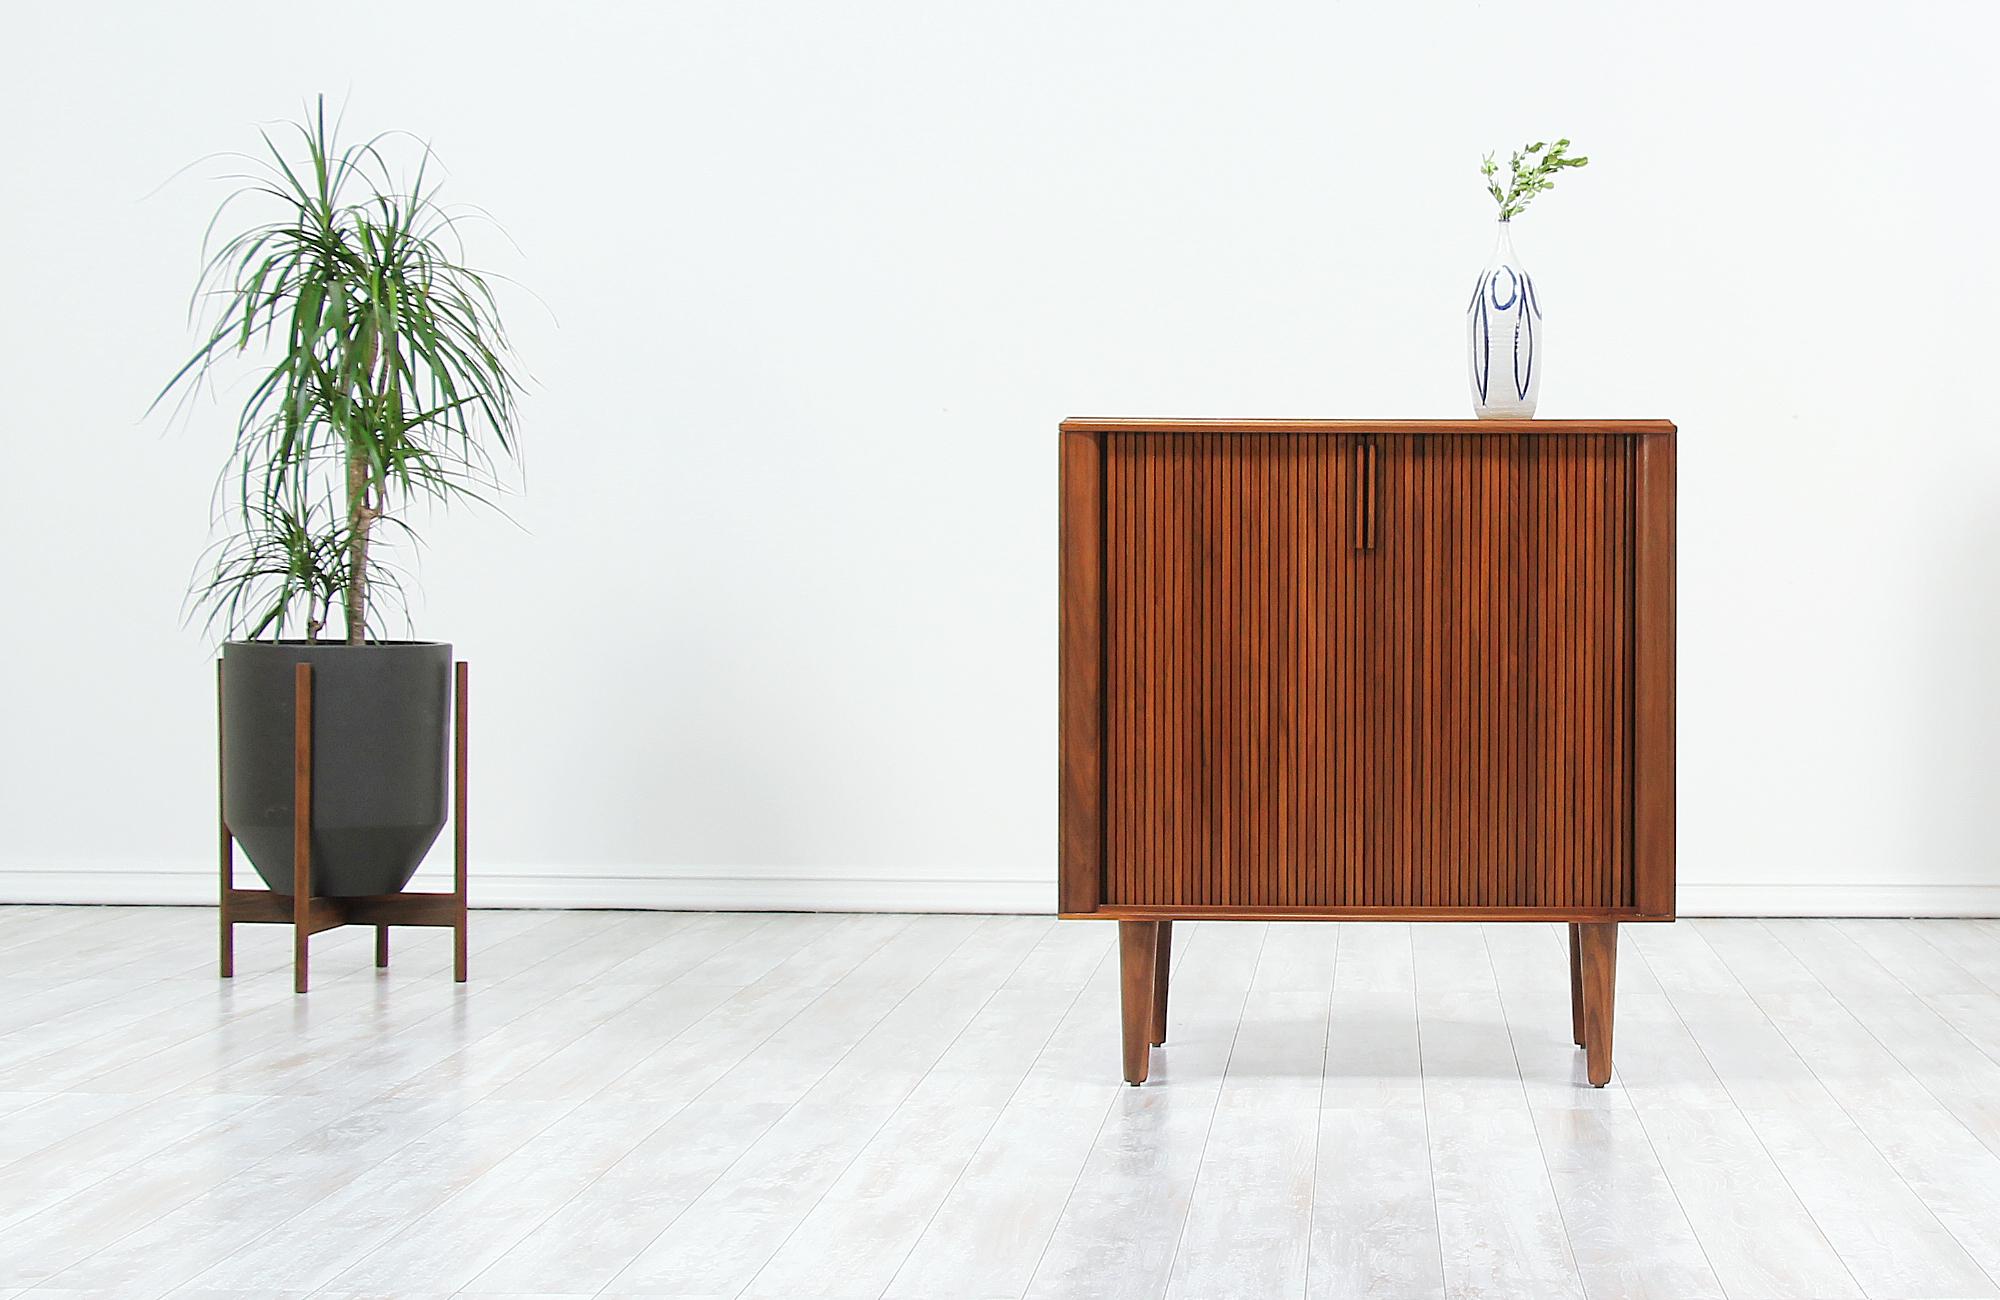 Minimalist vintage cabinet designed and manufactured in the United States by Barzilay, circa 1960s. Low in profile and compact in size, this stylish cabinet features a sturdy walnut wood frame with two tambour doors and four tapered legs that